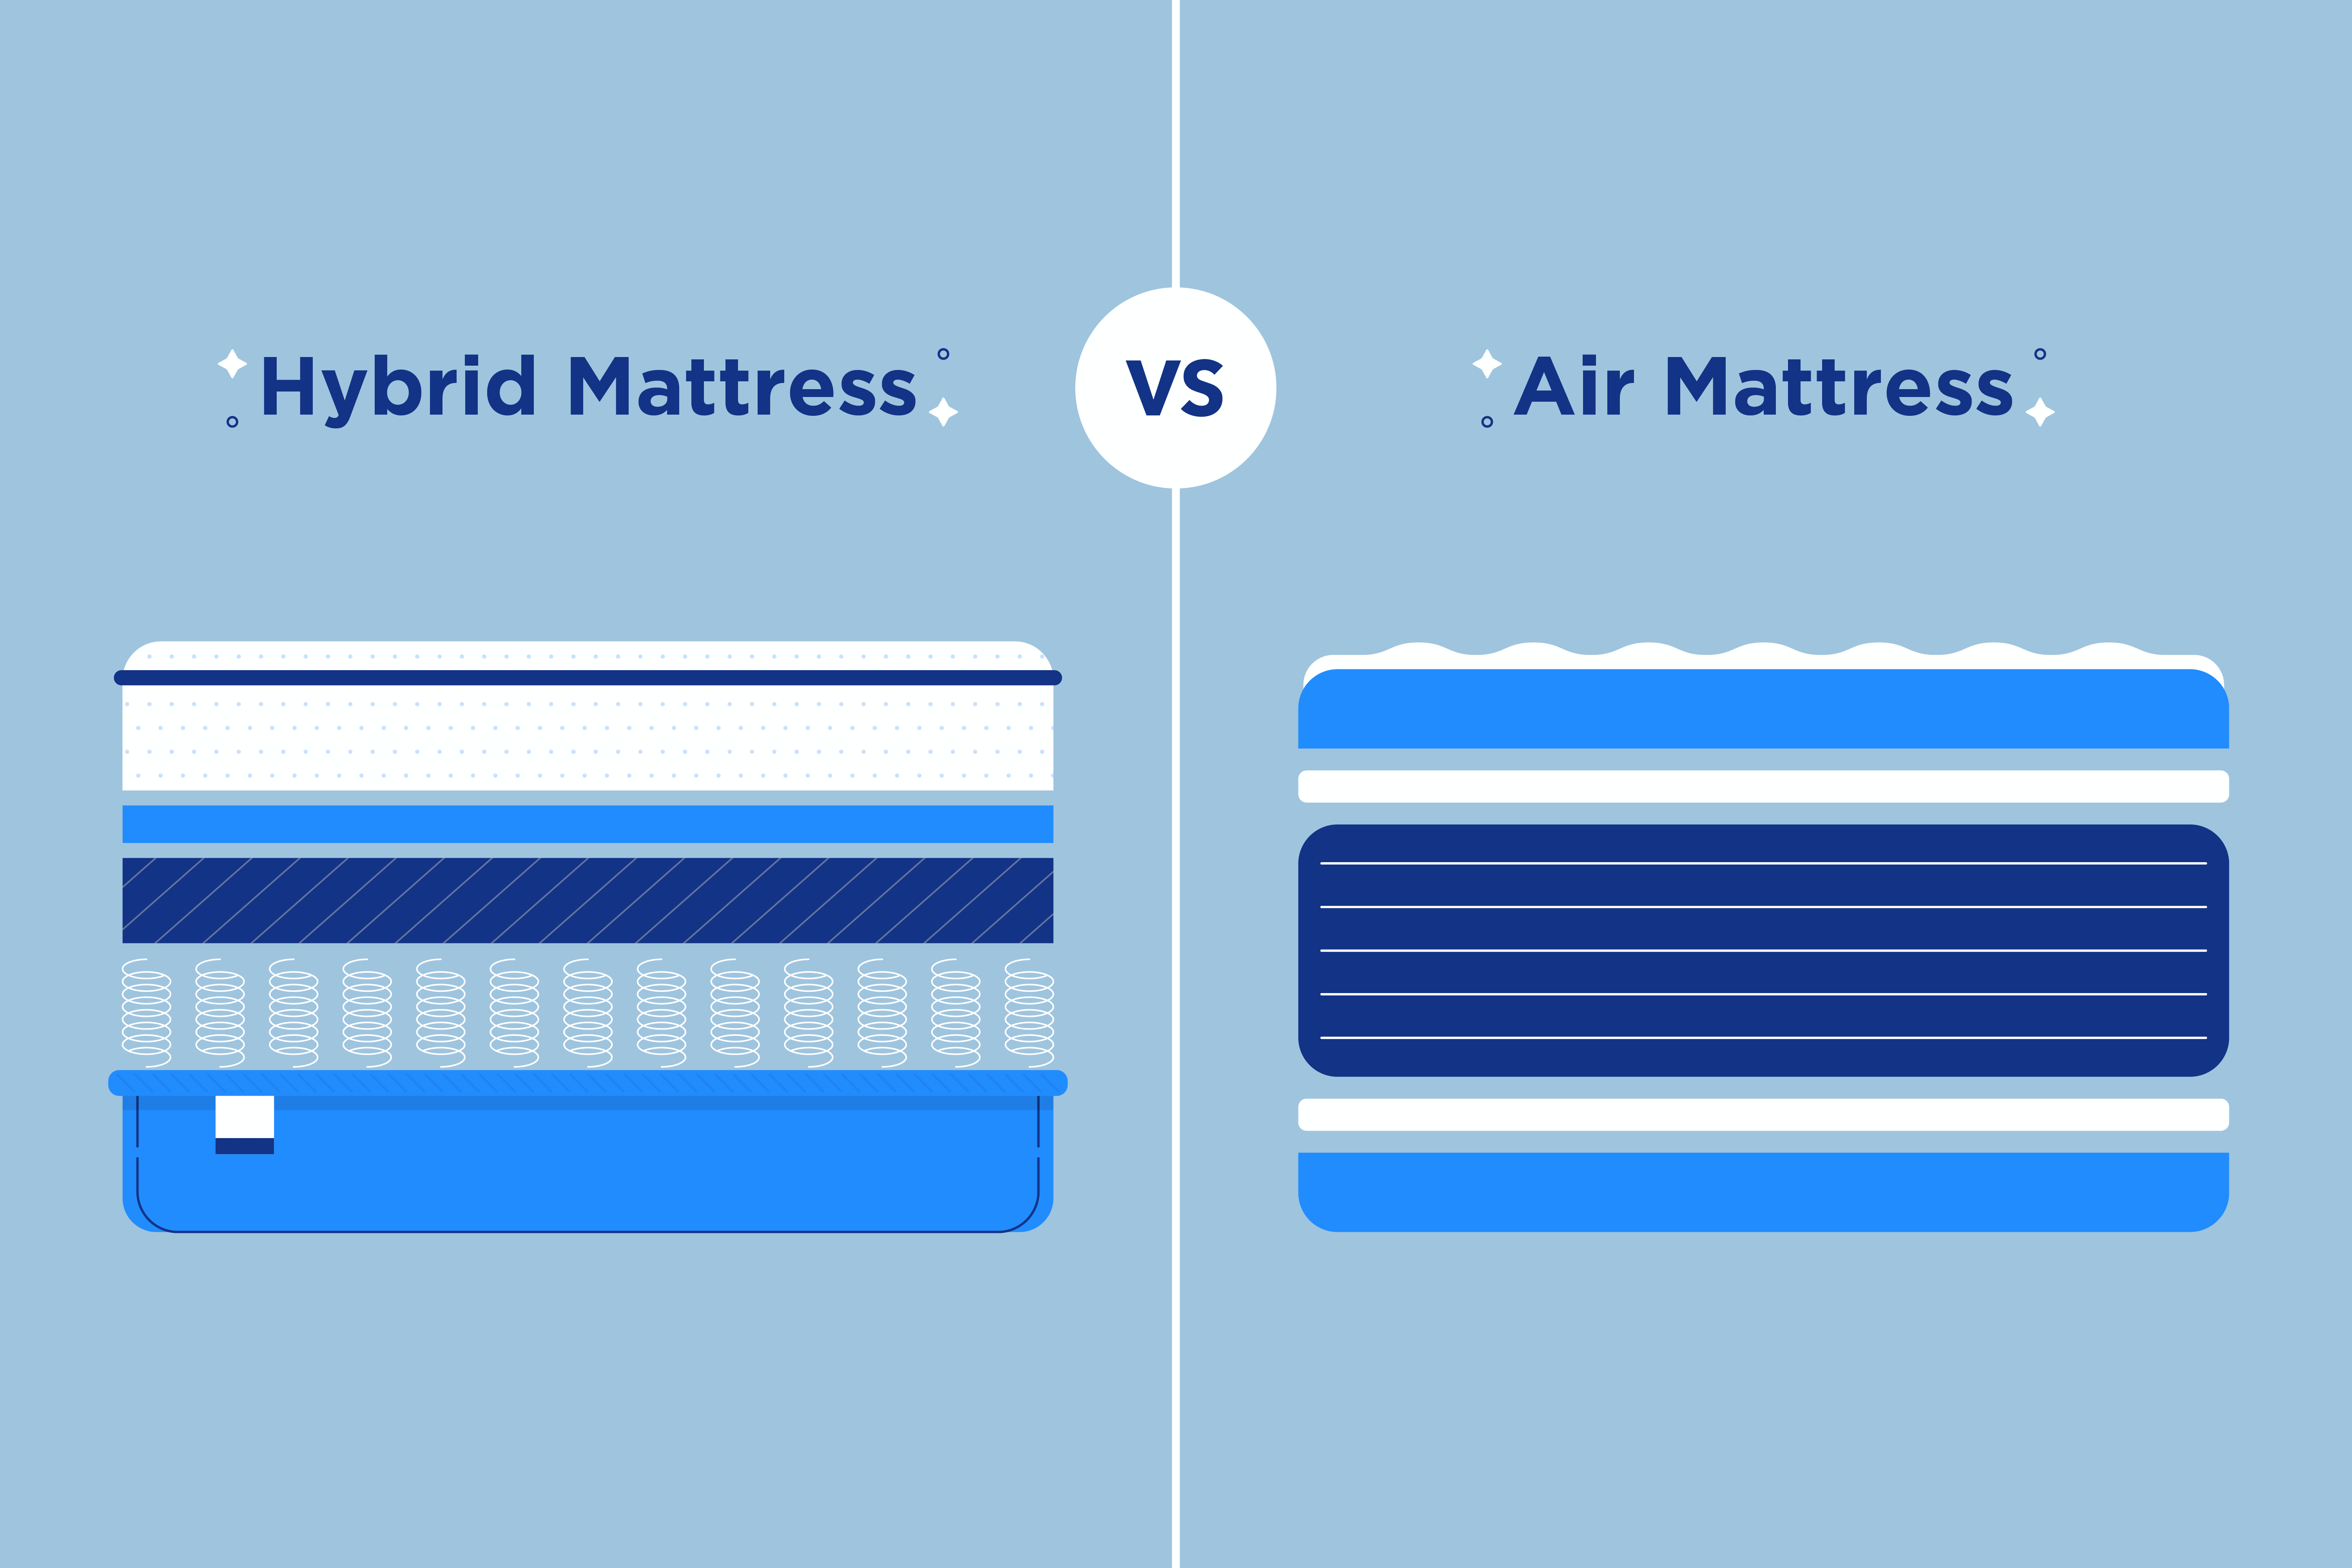 Hybrid Mattress vs Air Mattress: What is the Difference?